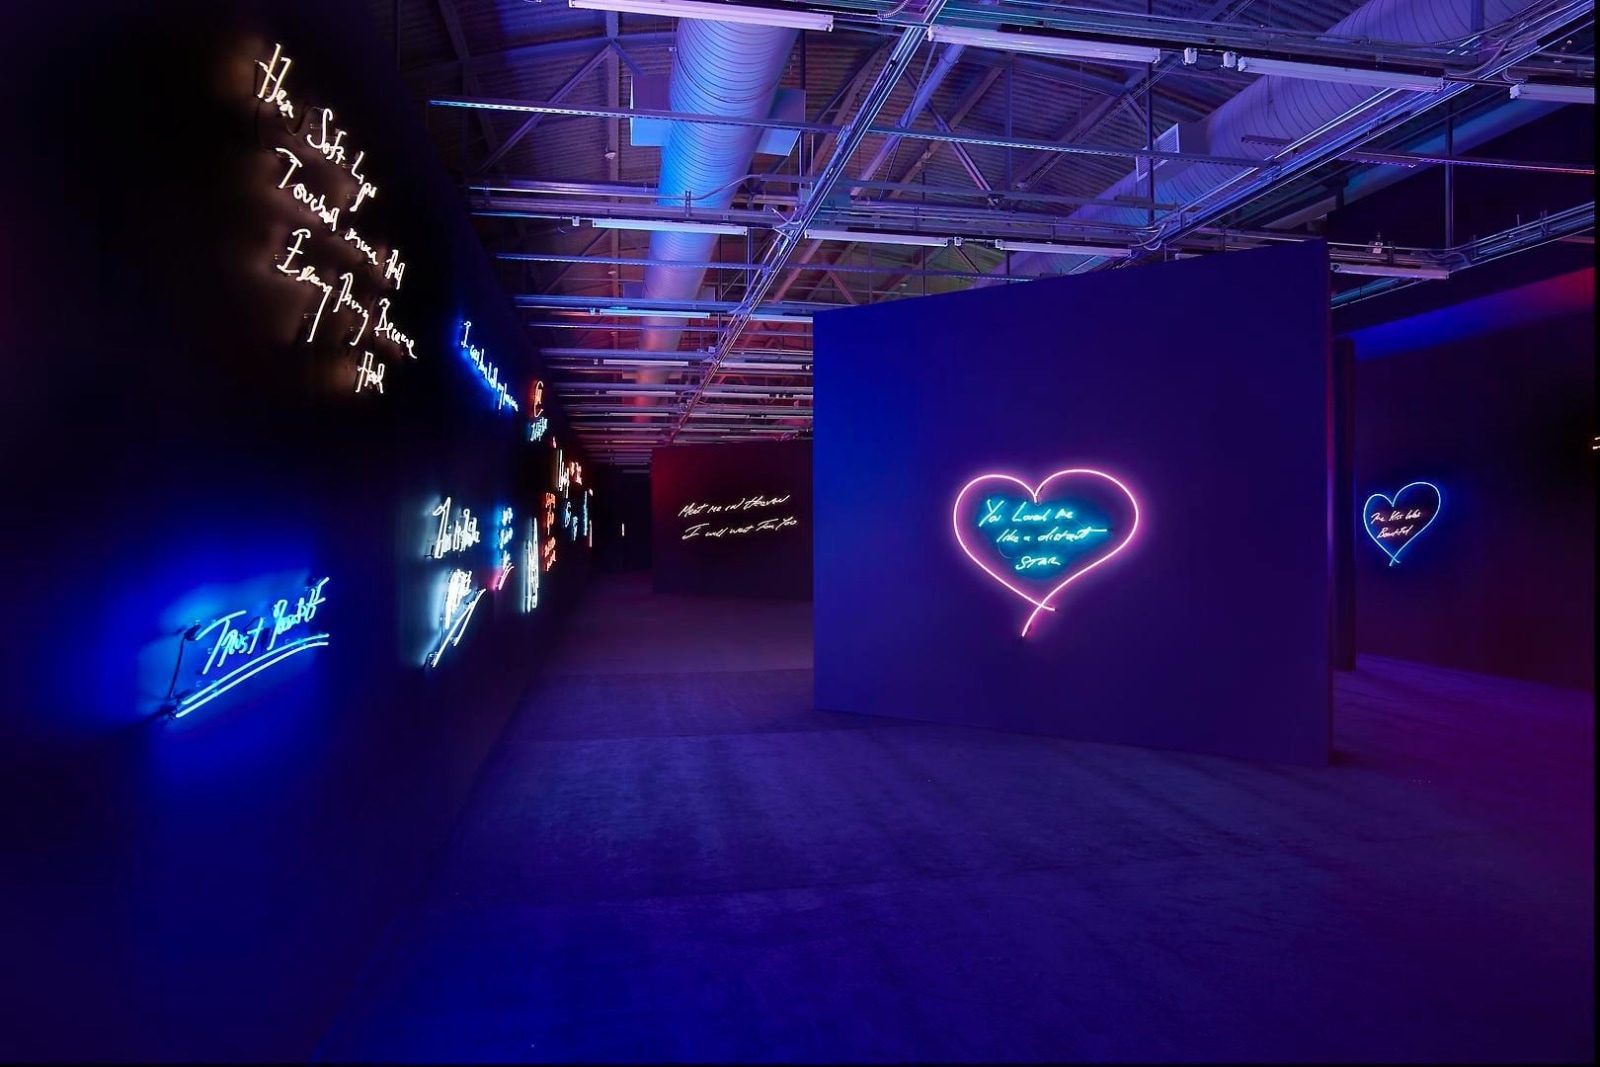  Tracey Emin: Angel Without You